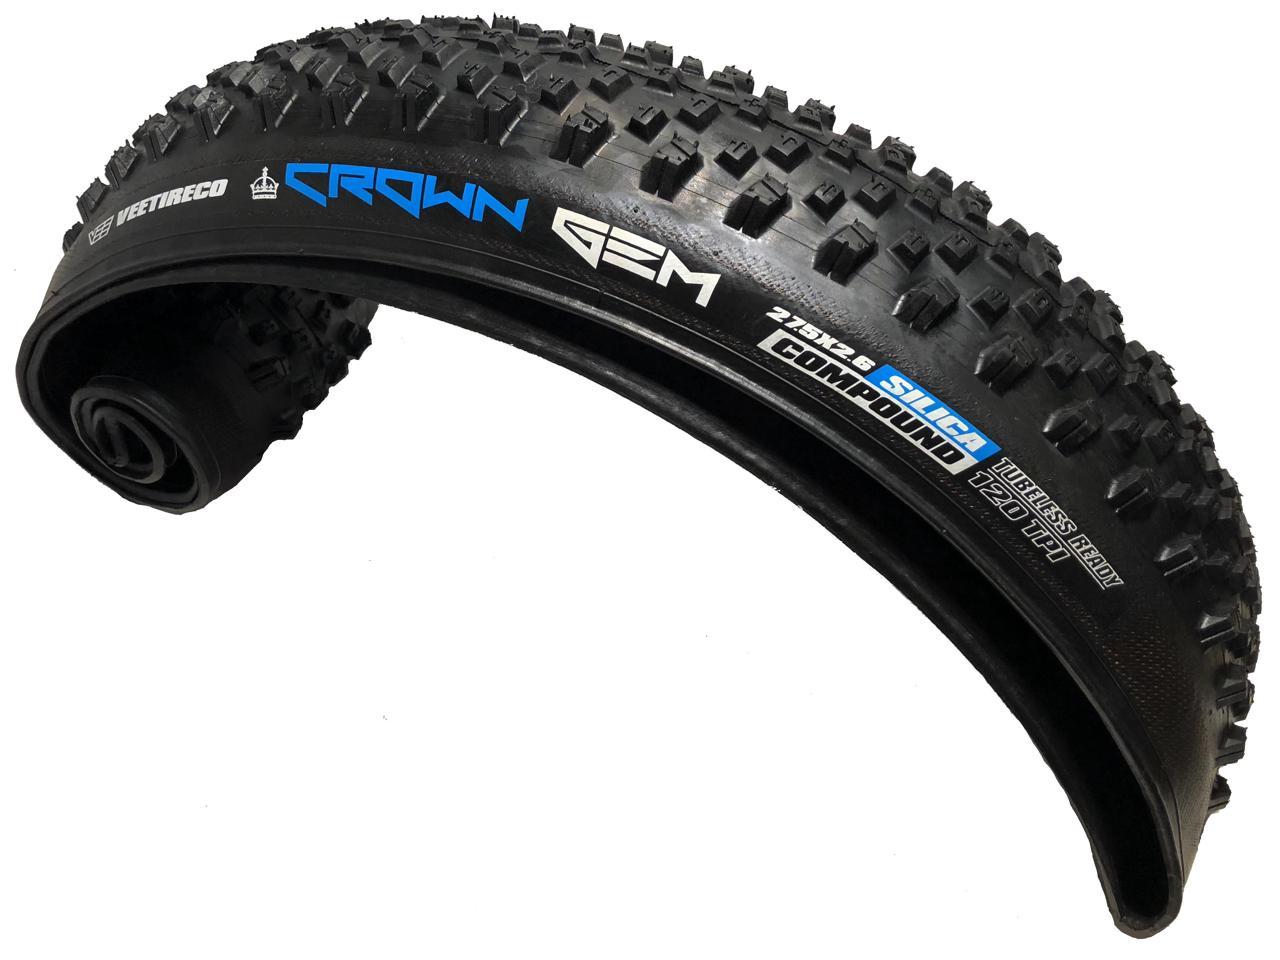 Vee Crown F 27.5x2.25 Tire MTB Folding Bead Dual Compound Synthesis Sidewall